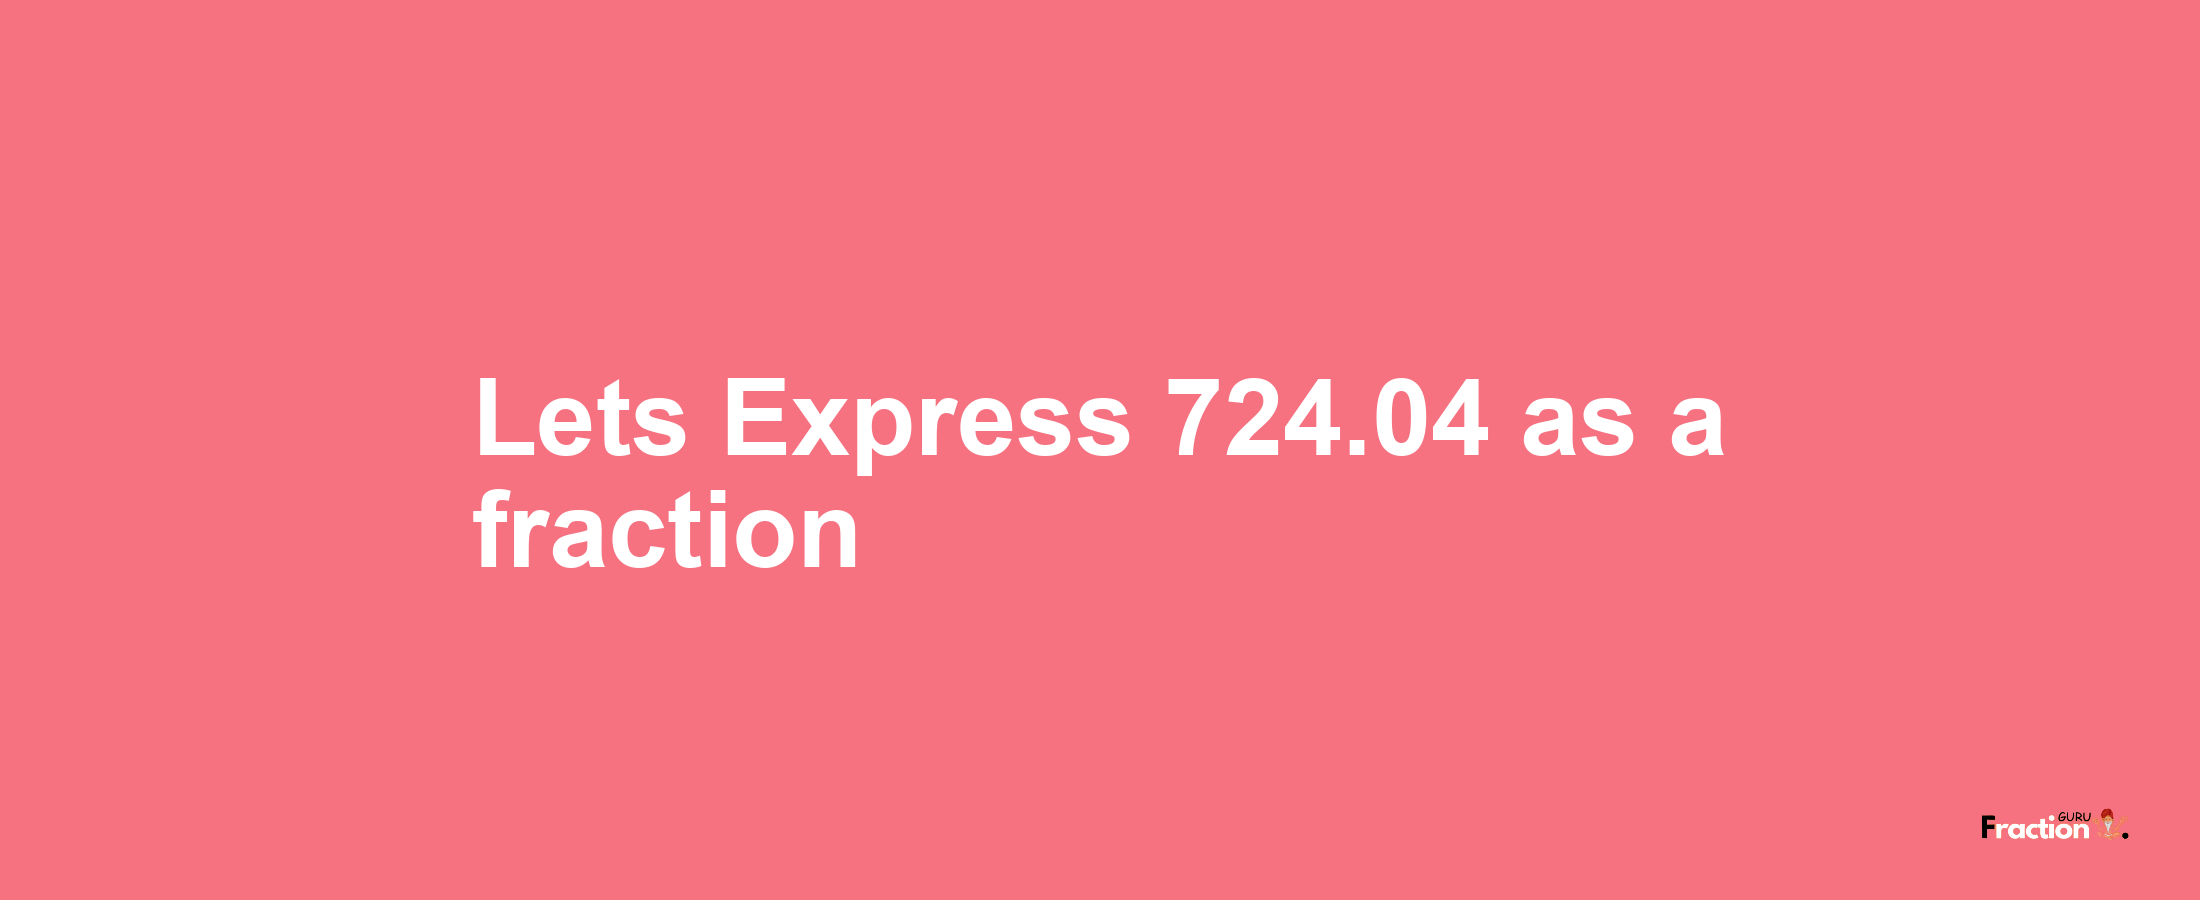 Lets Express 724.04 as afraction